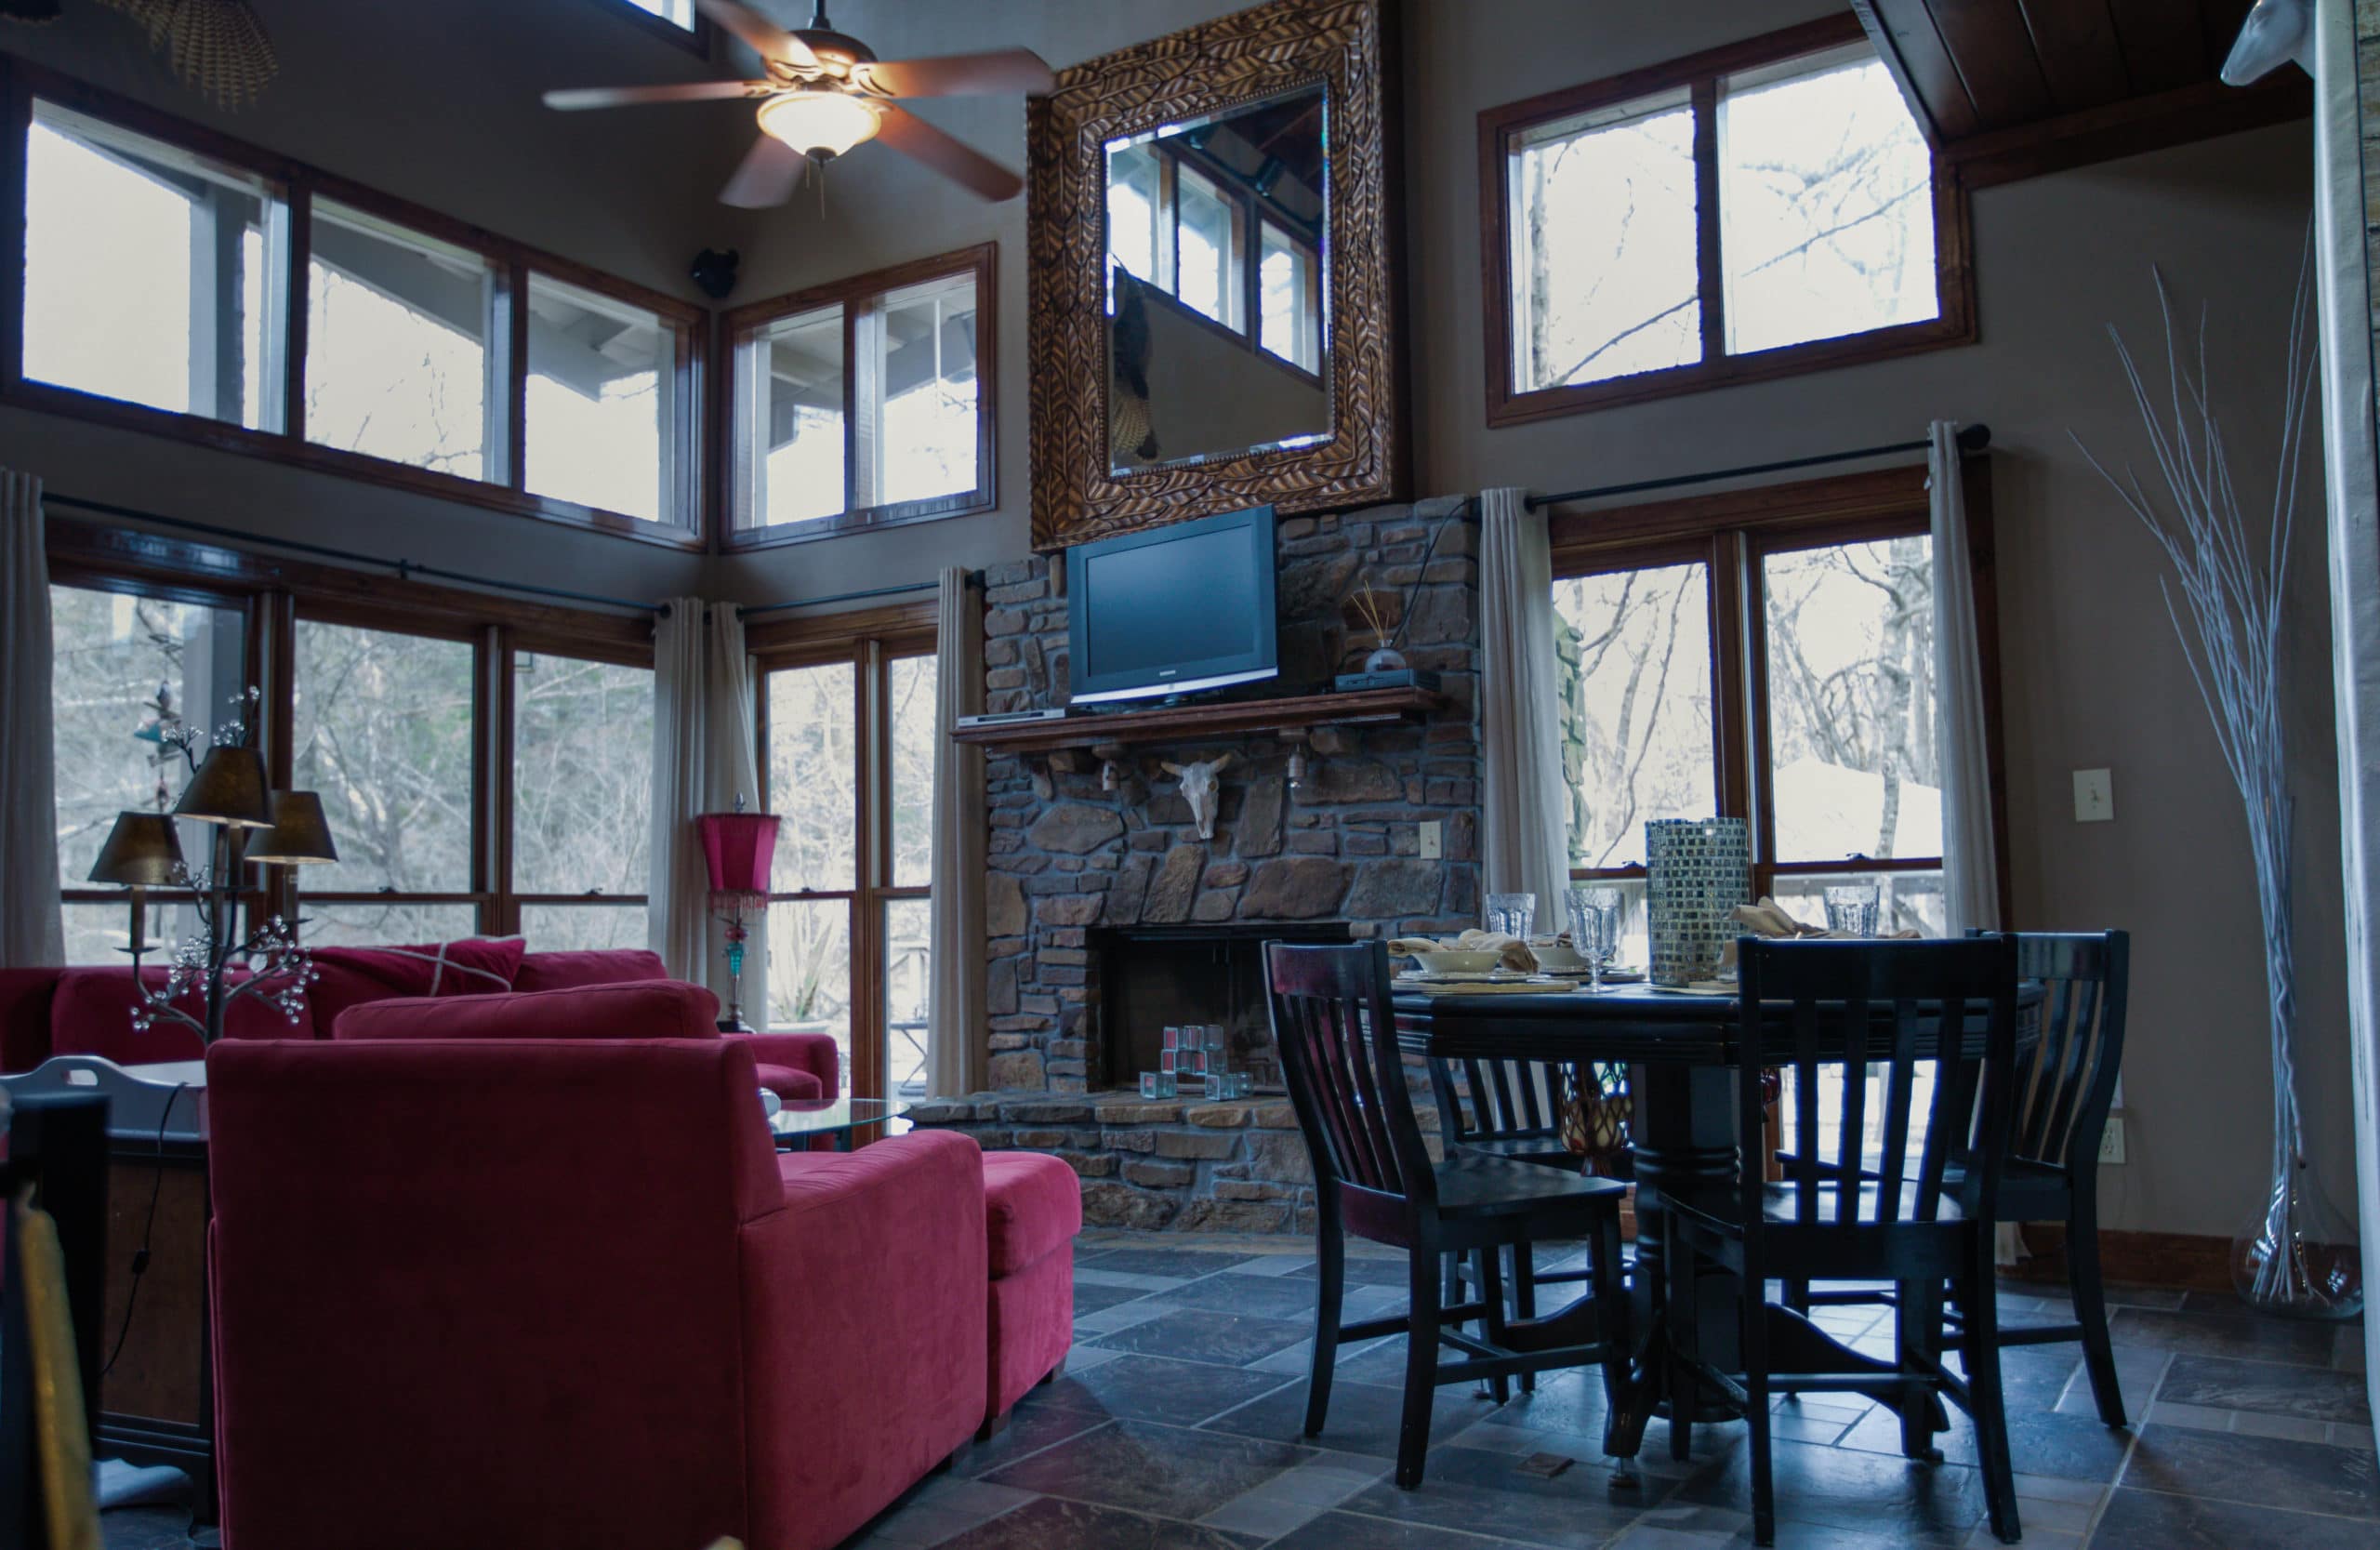 rivers-bend-cabin-04-riverside-retreat-living-room-wall-of-windows-red-furniture-dining-table-sitting-view-scaled